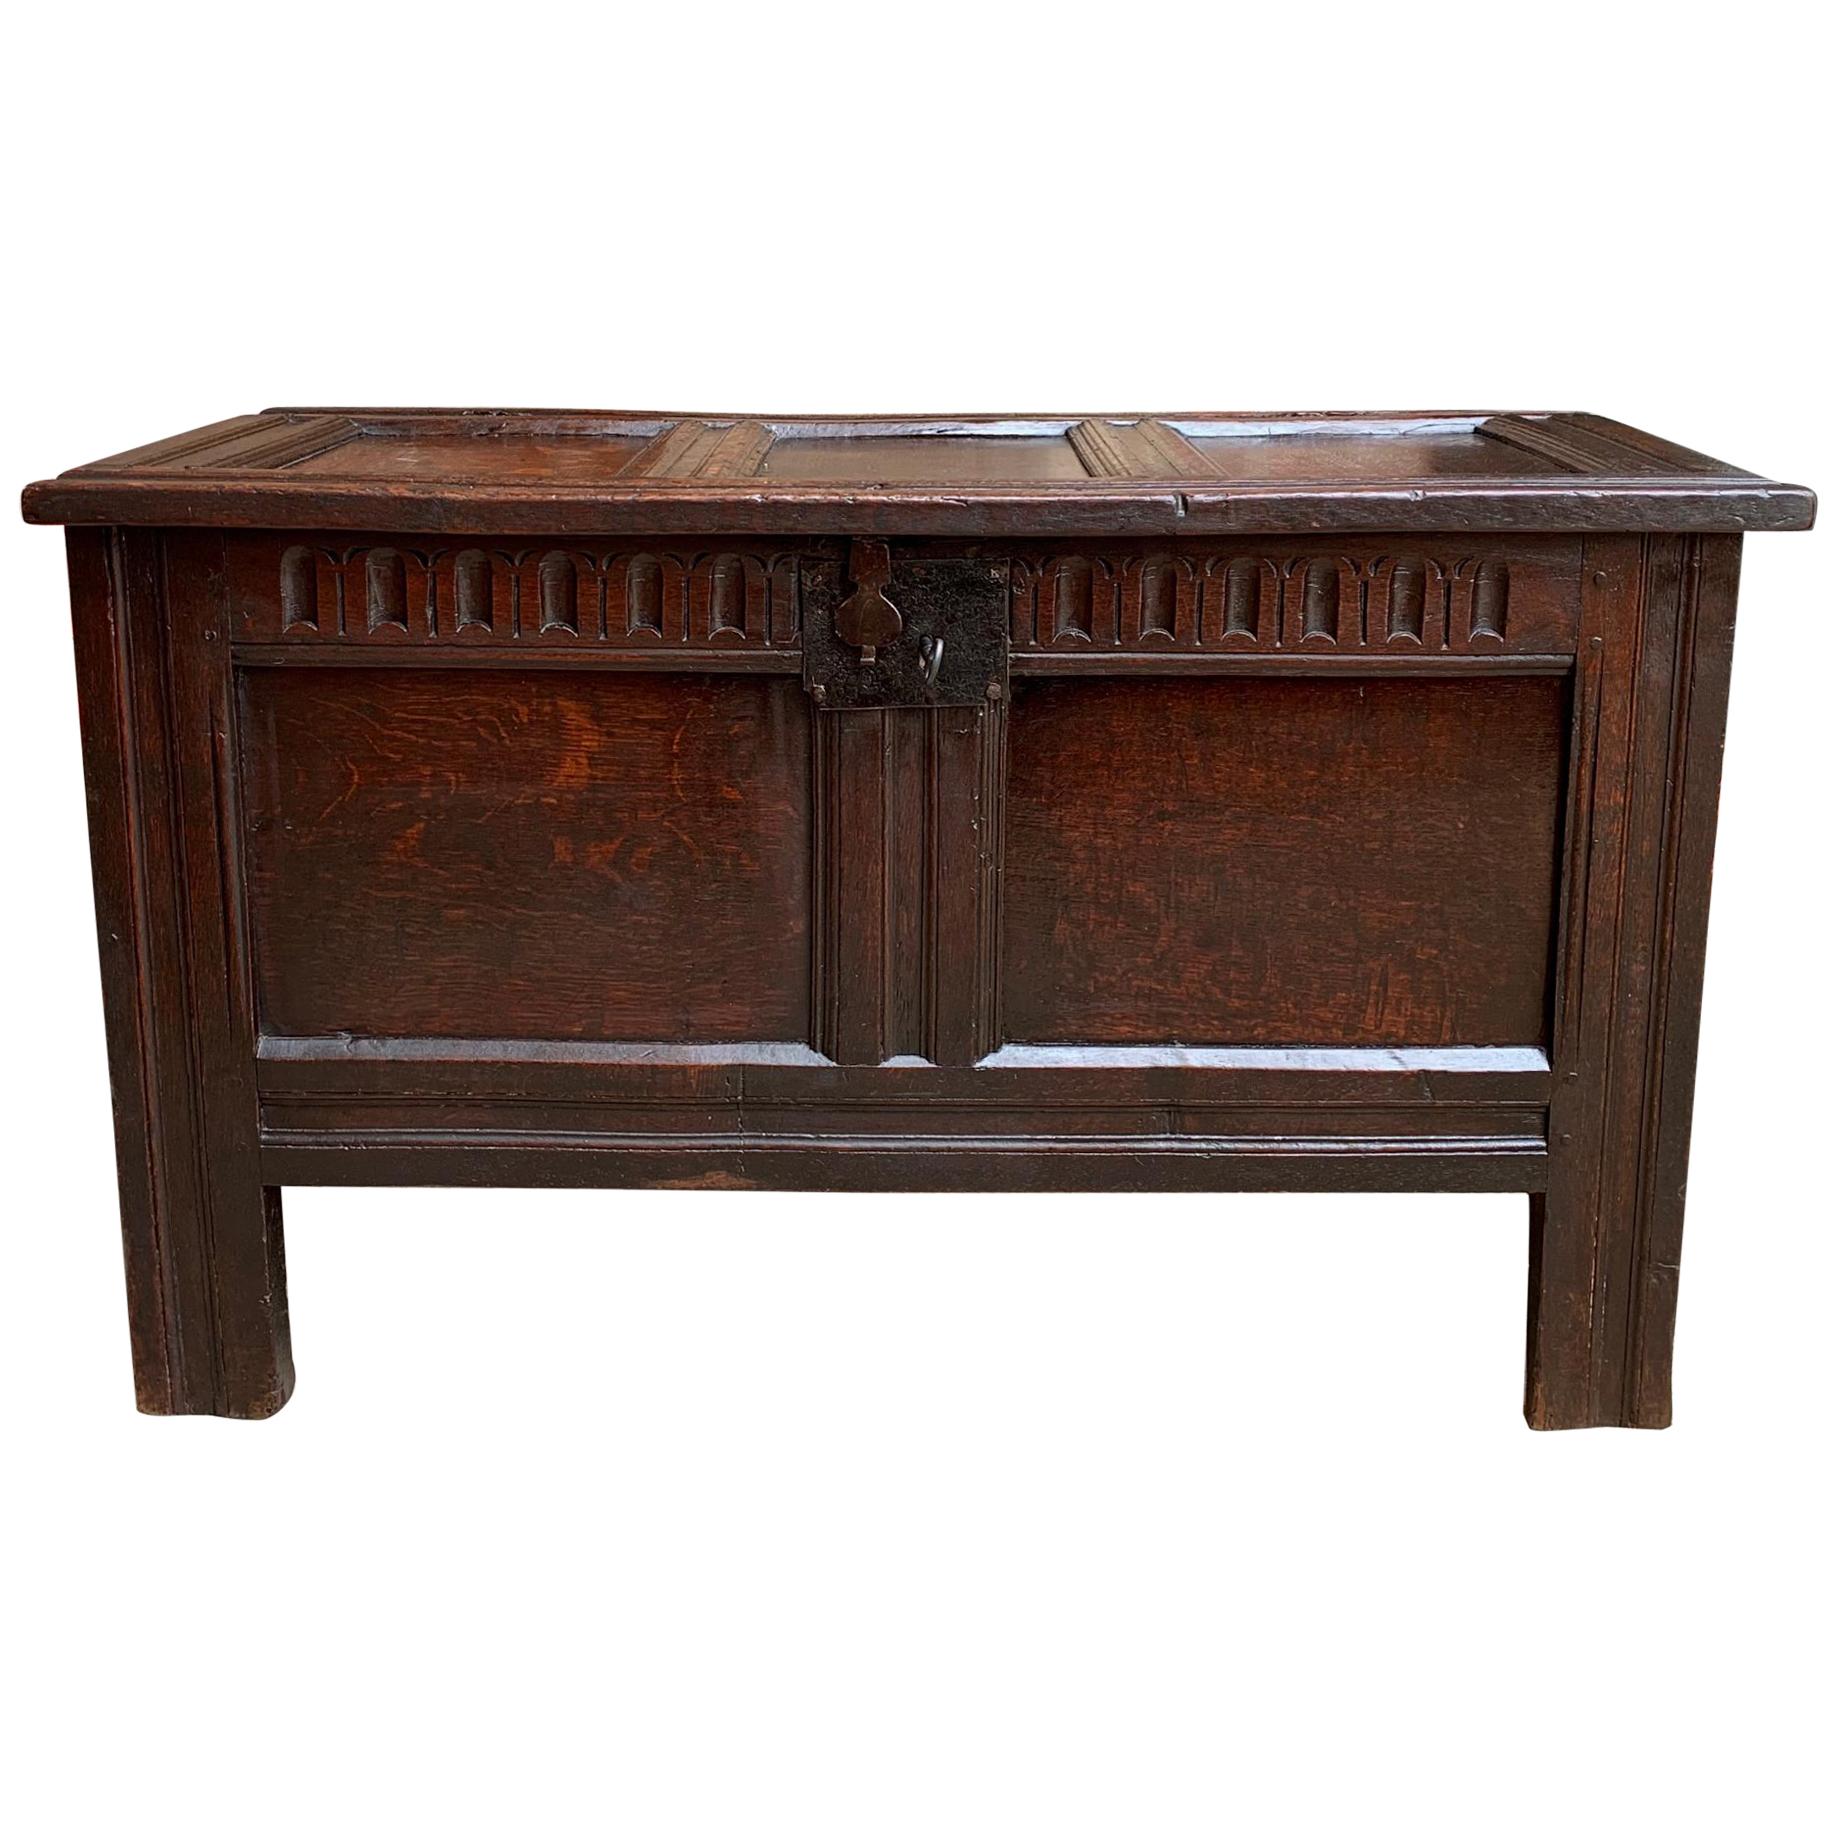 Antique English Carved Oak Coffer Trunk Chest Coffee Table Blanket Box c1770 For Sale